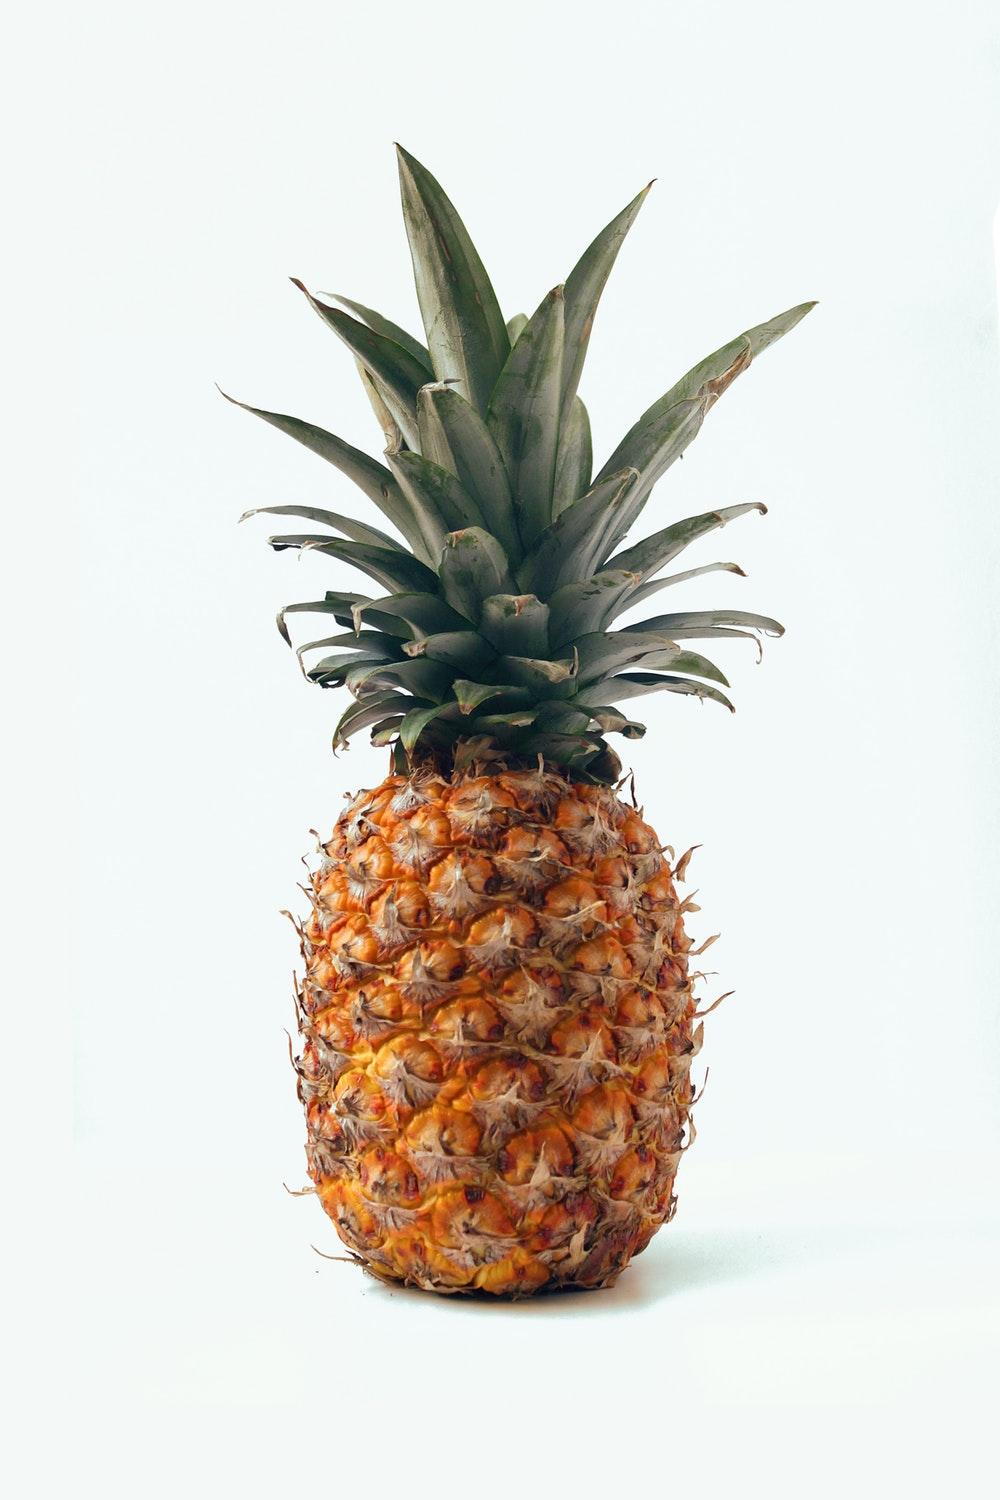 Pineapple Picture. Download Free Image